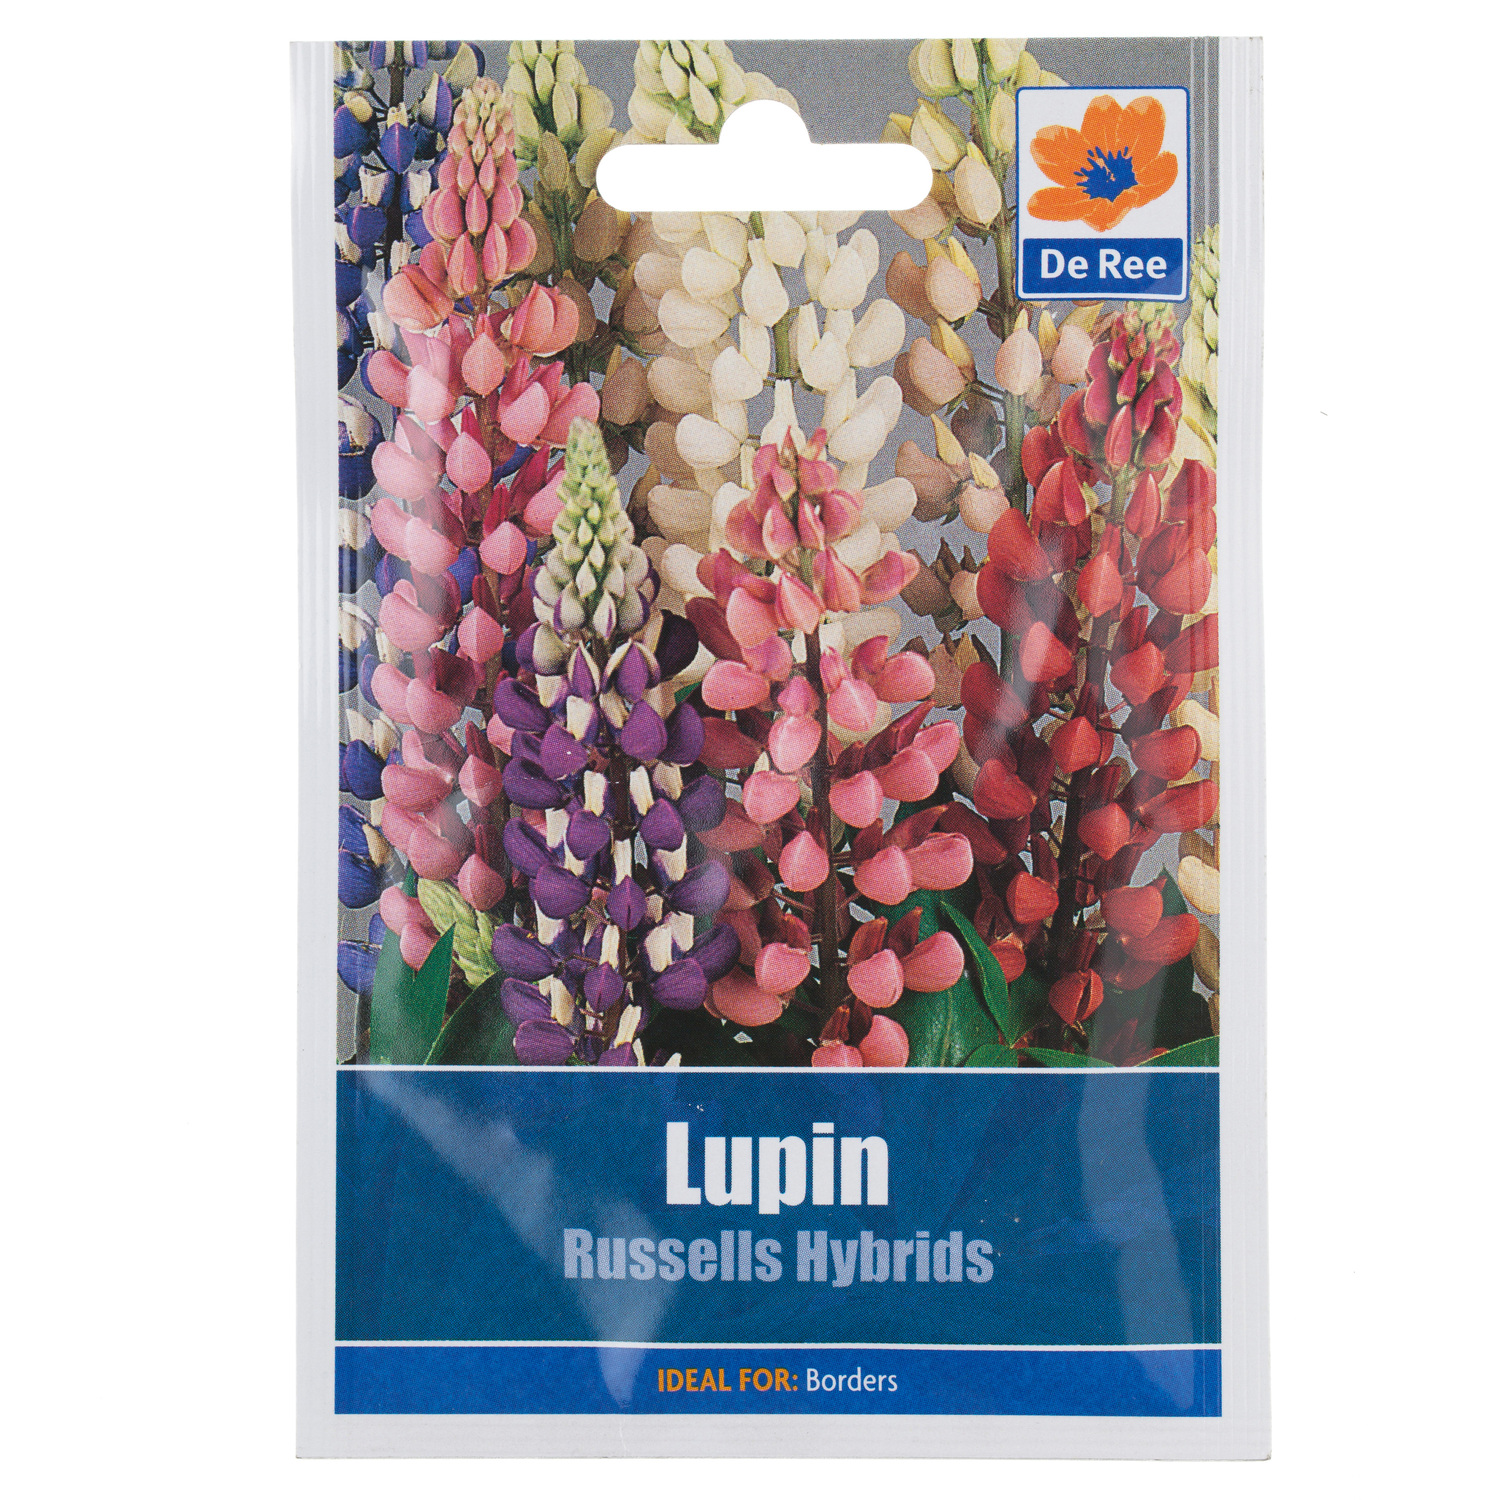 Lupin Russells Hybrids Seed Packet Image